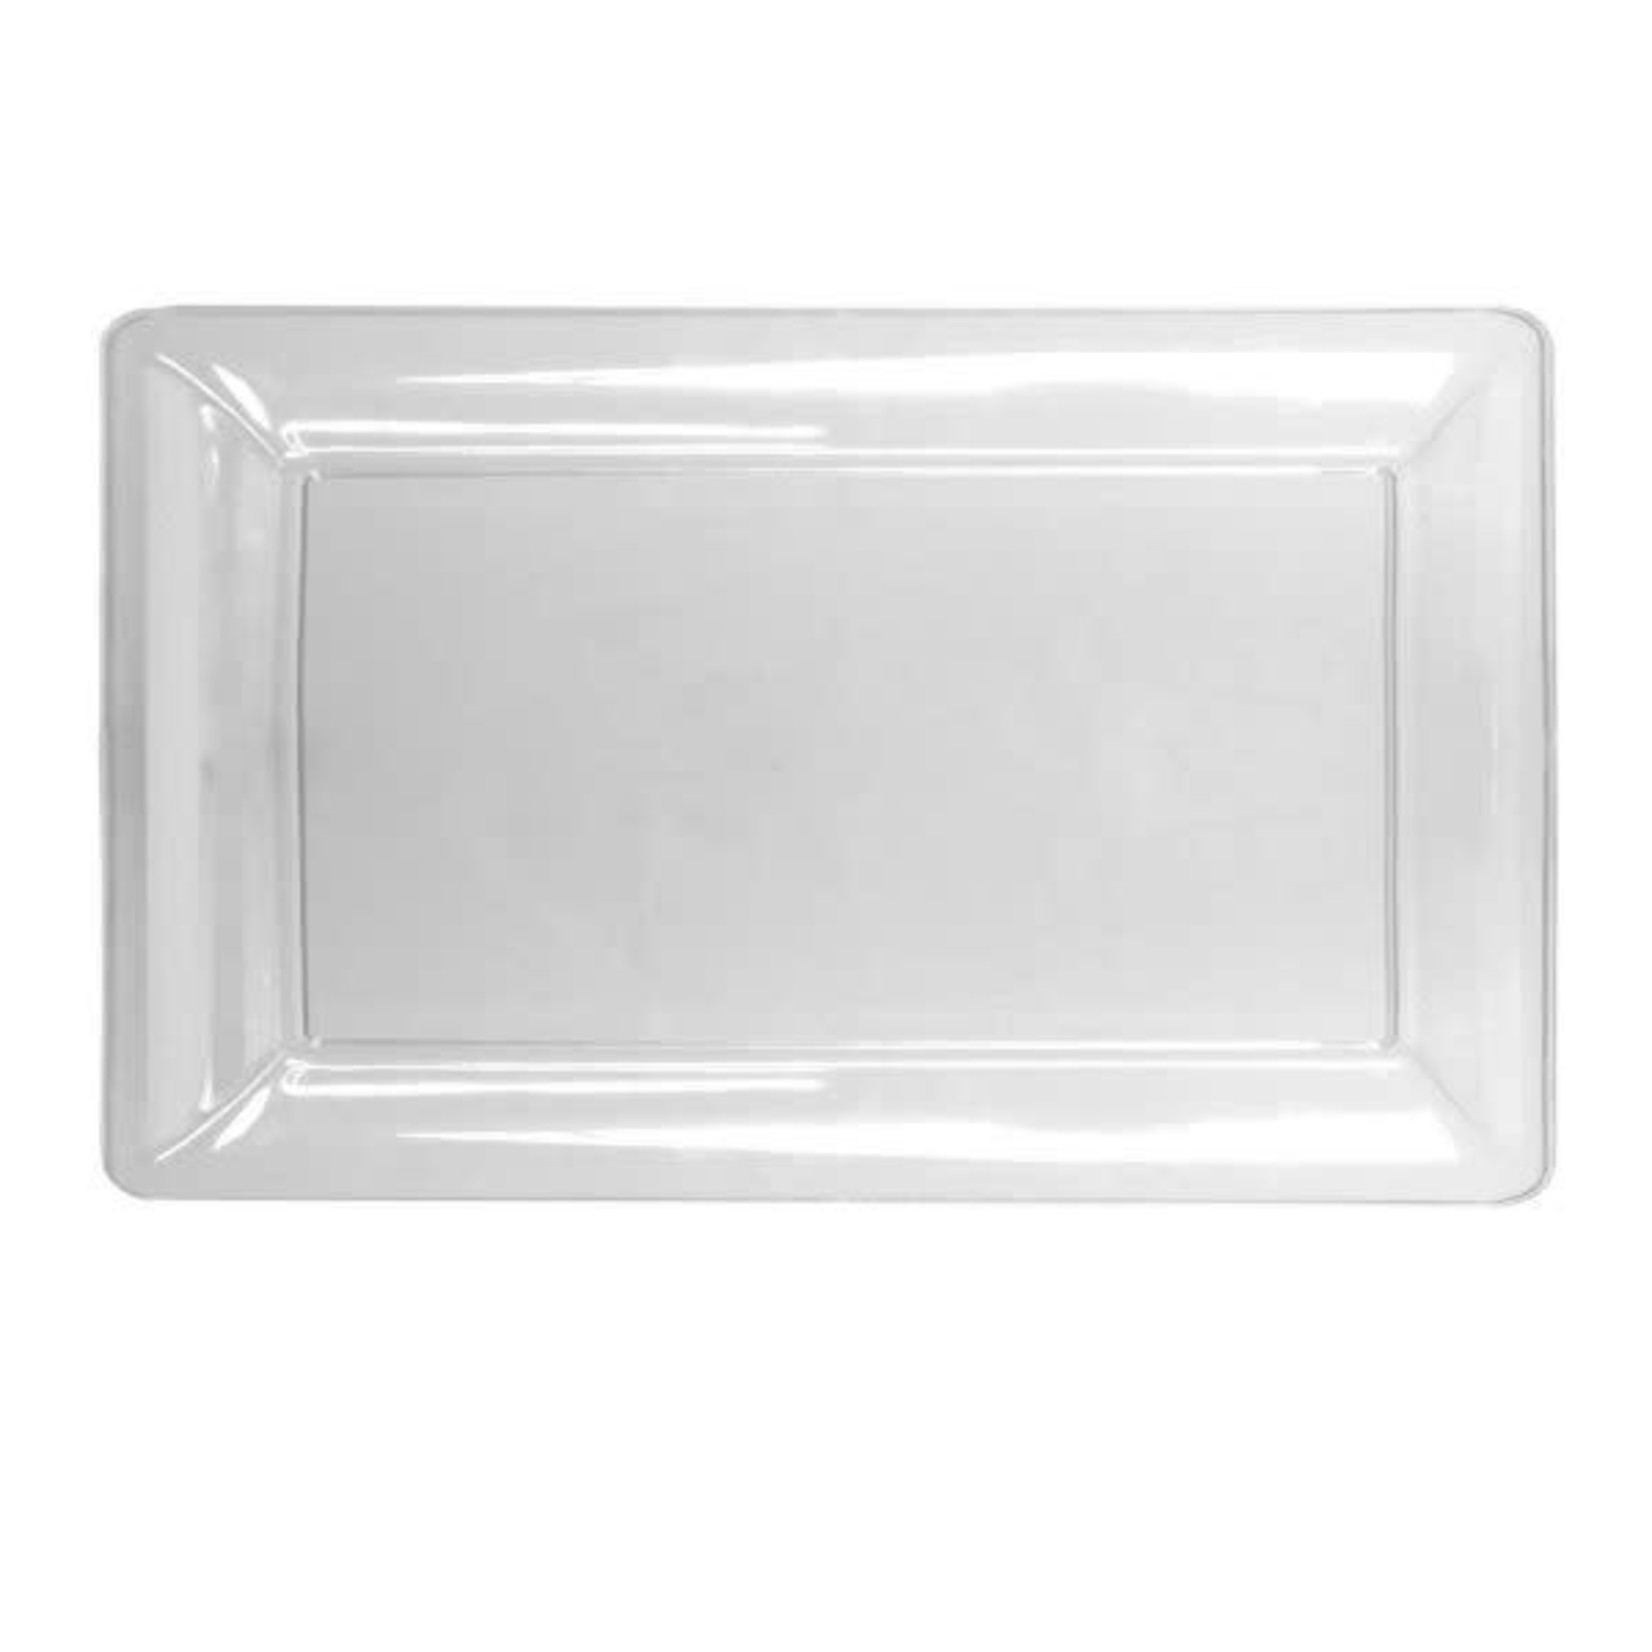 northwest Clear Serving Tray 12"x18"